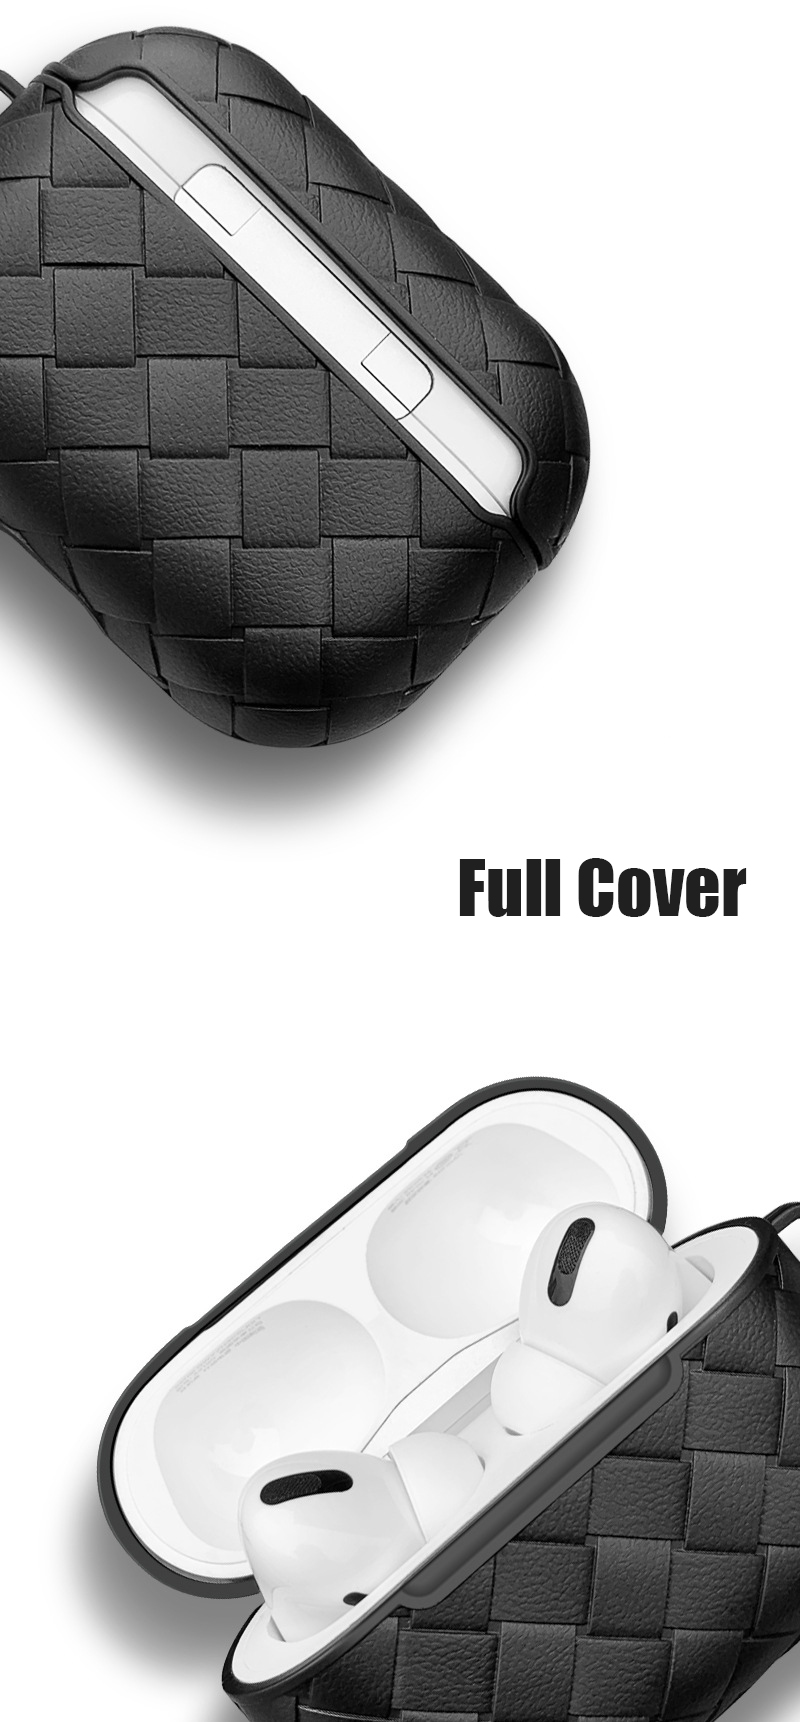 Bakeey-Business-Heat-Dissipation-TPU-Shockproof-Earphone-Storage-Case-for-Apple-Airpods-3-Airpods-Pr-1620283-1